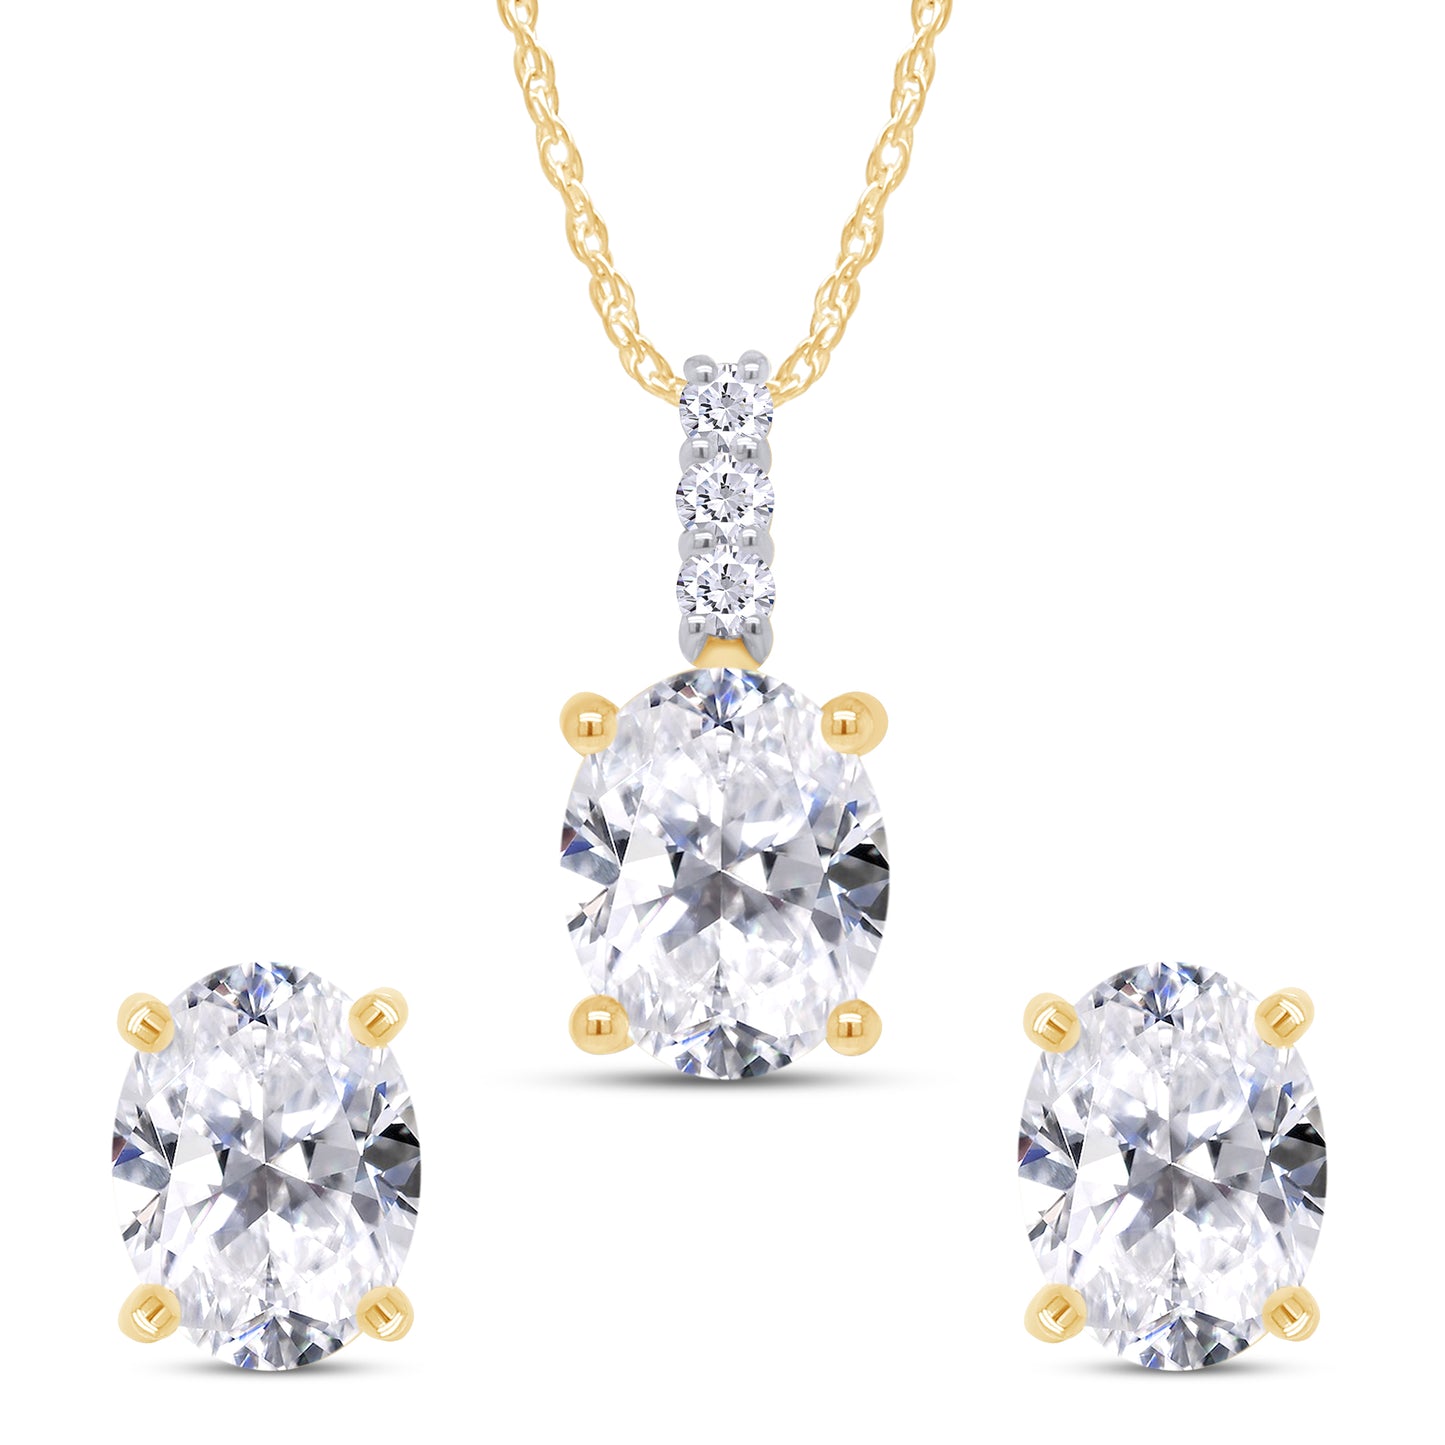 9X7MM Oval Cut Lab Created Moissanite Diamond Solitaire Pendant & Stud Earrings Jewelry Set In 925 Sterling Silver